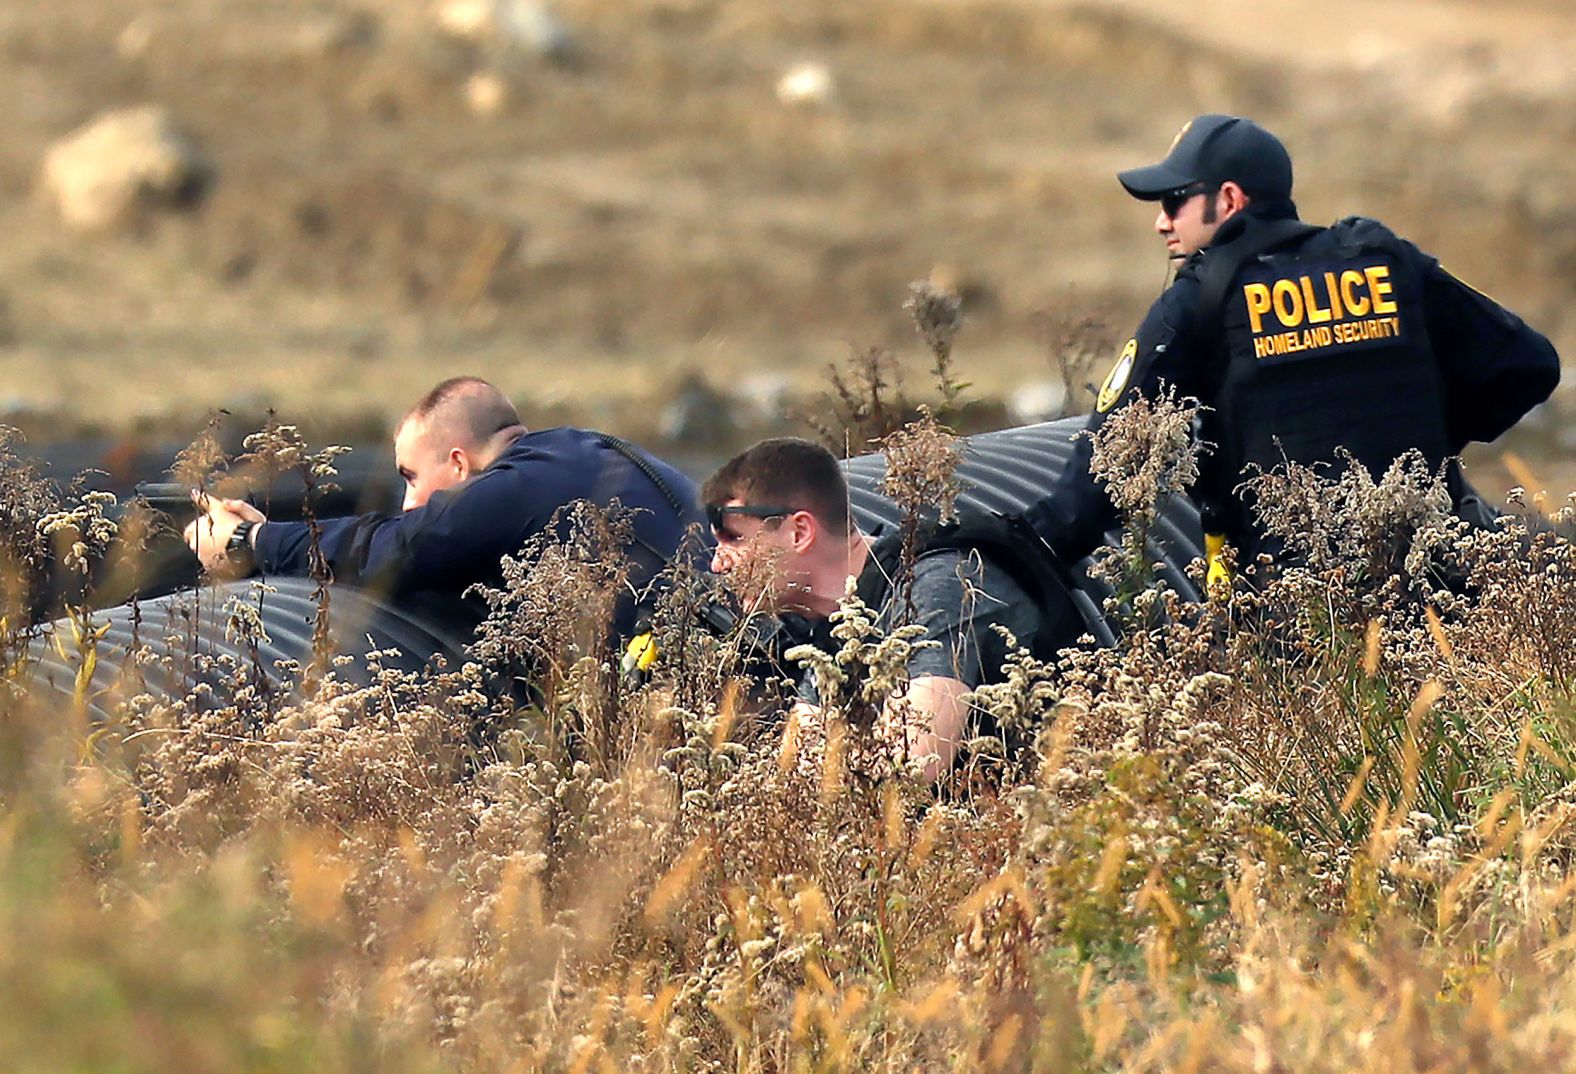 Police take aim after people in the area heard a gunshot at a farm in Lisbon on Friday.